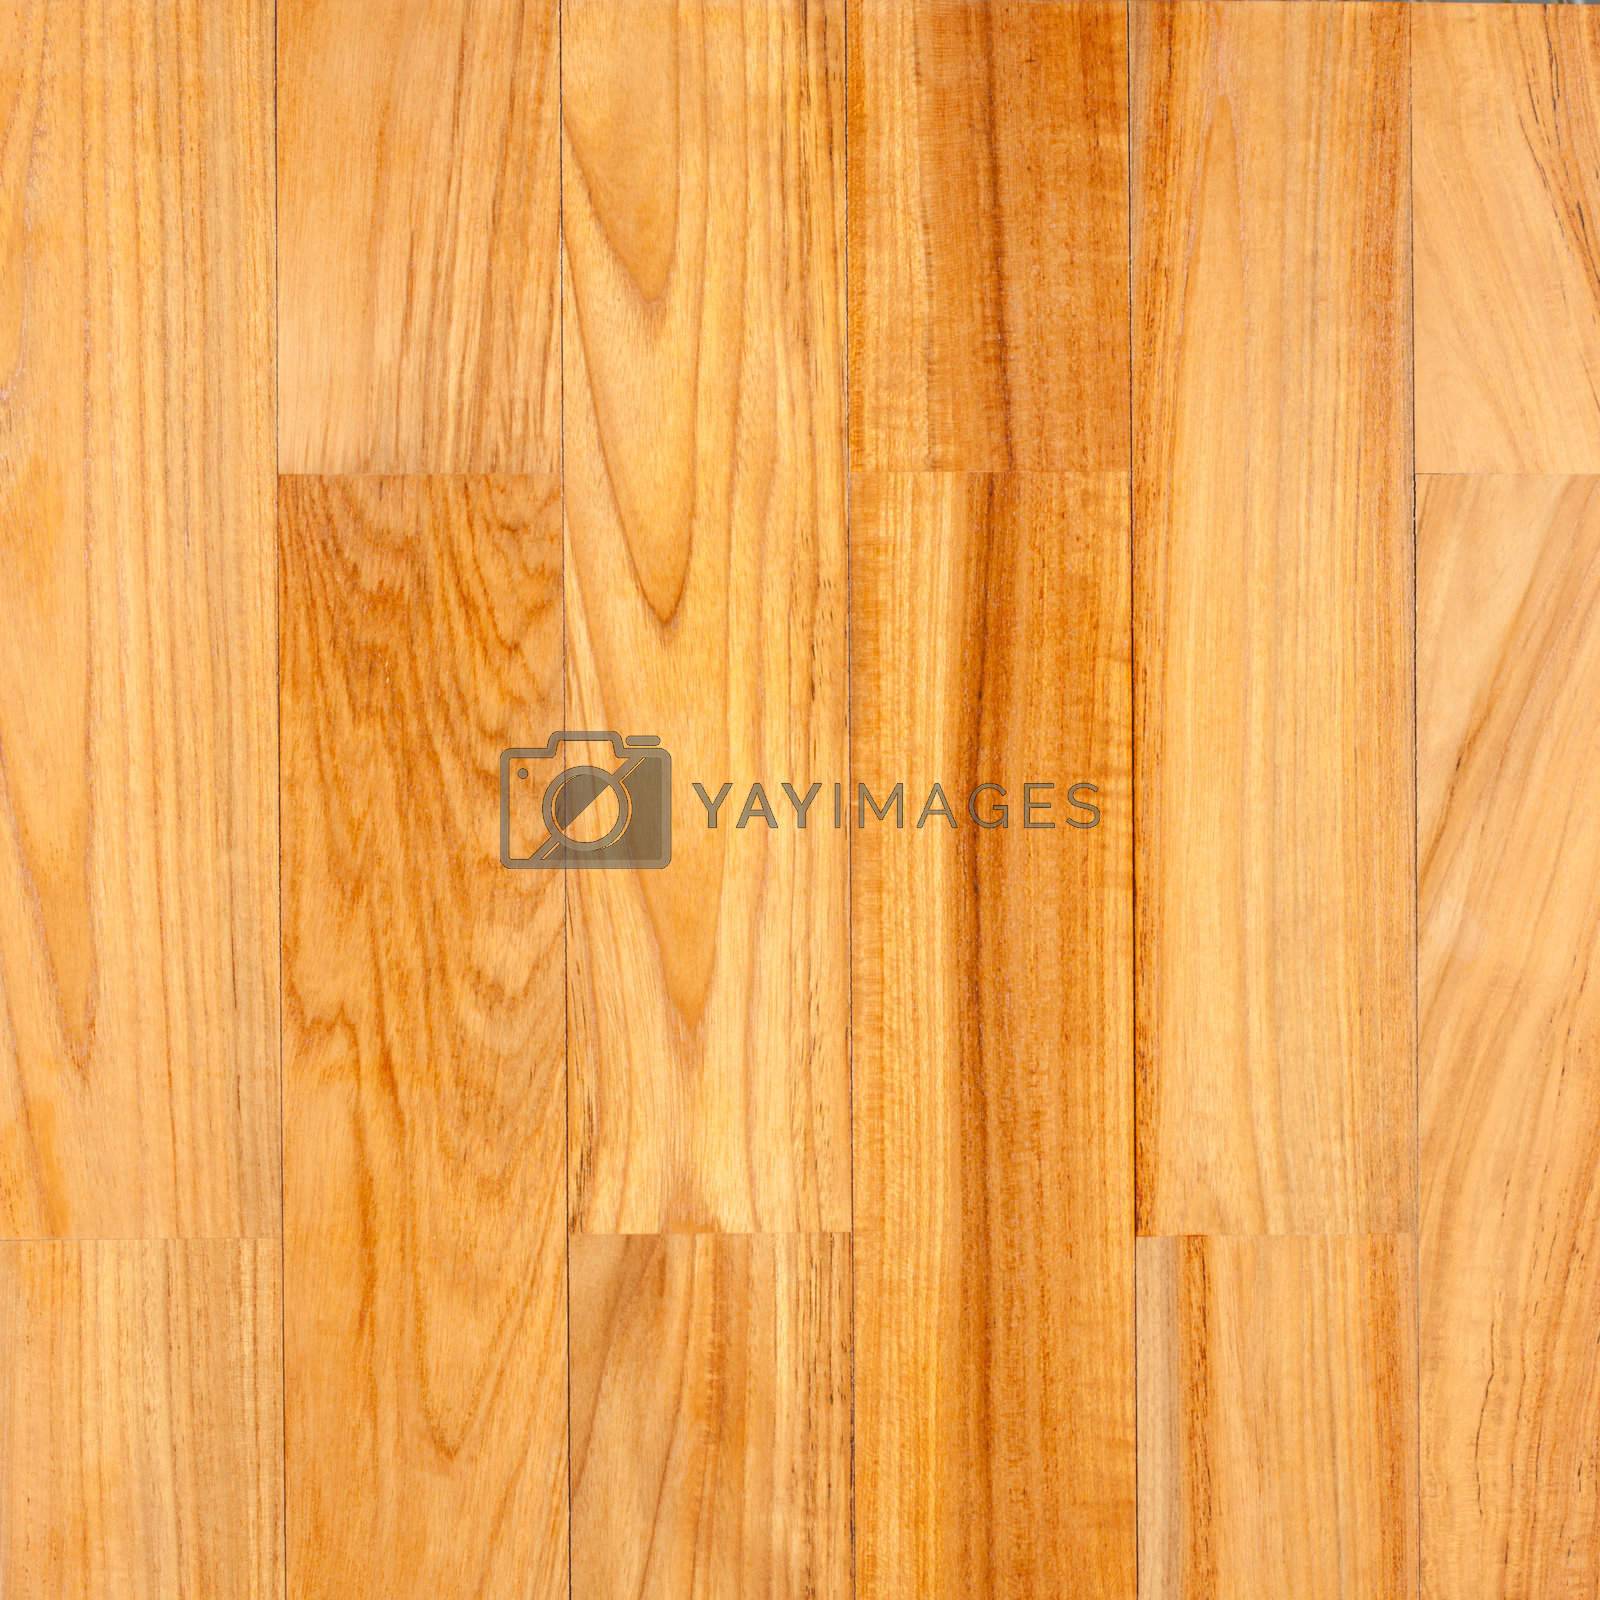 Royalty free image of parquet by marylooo